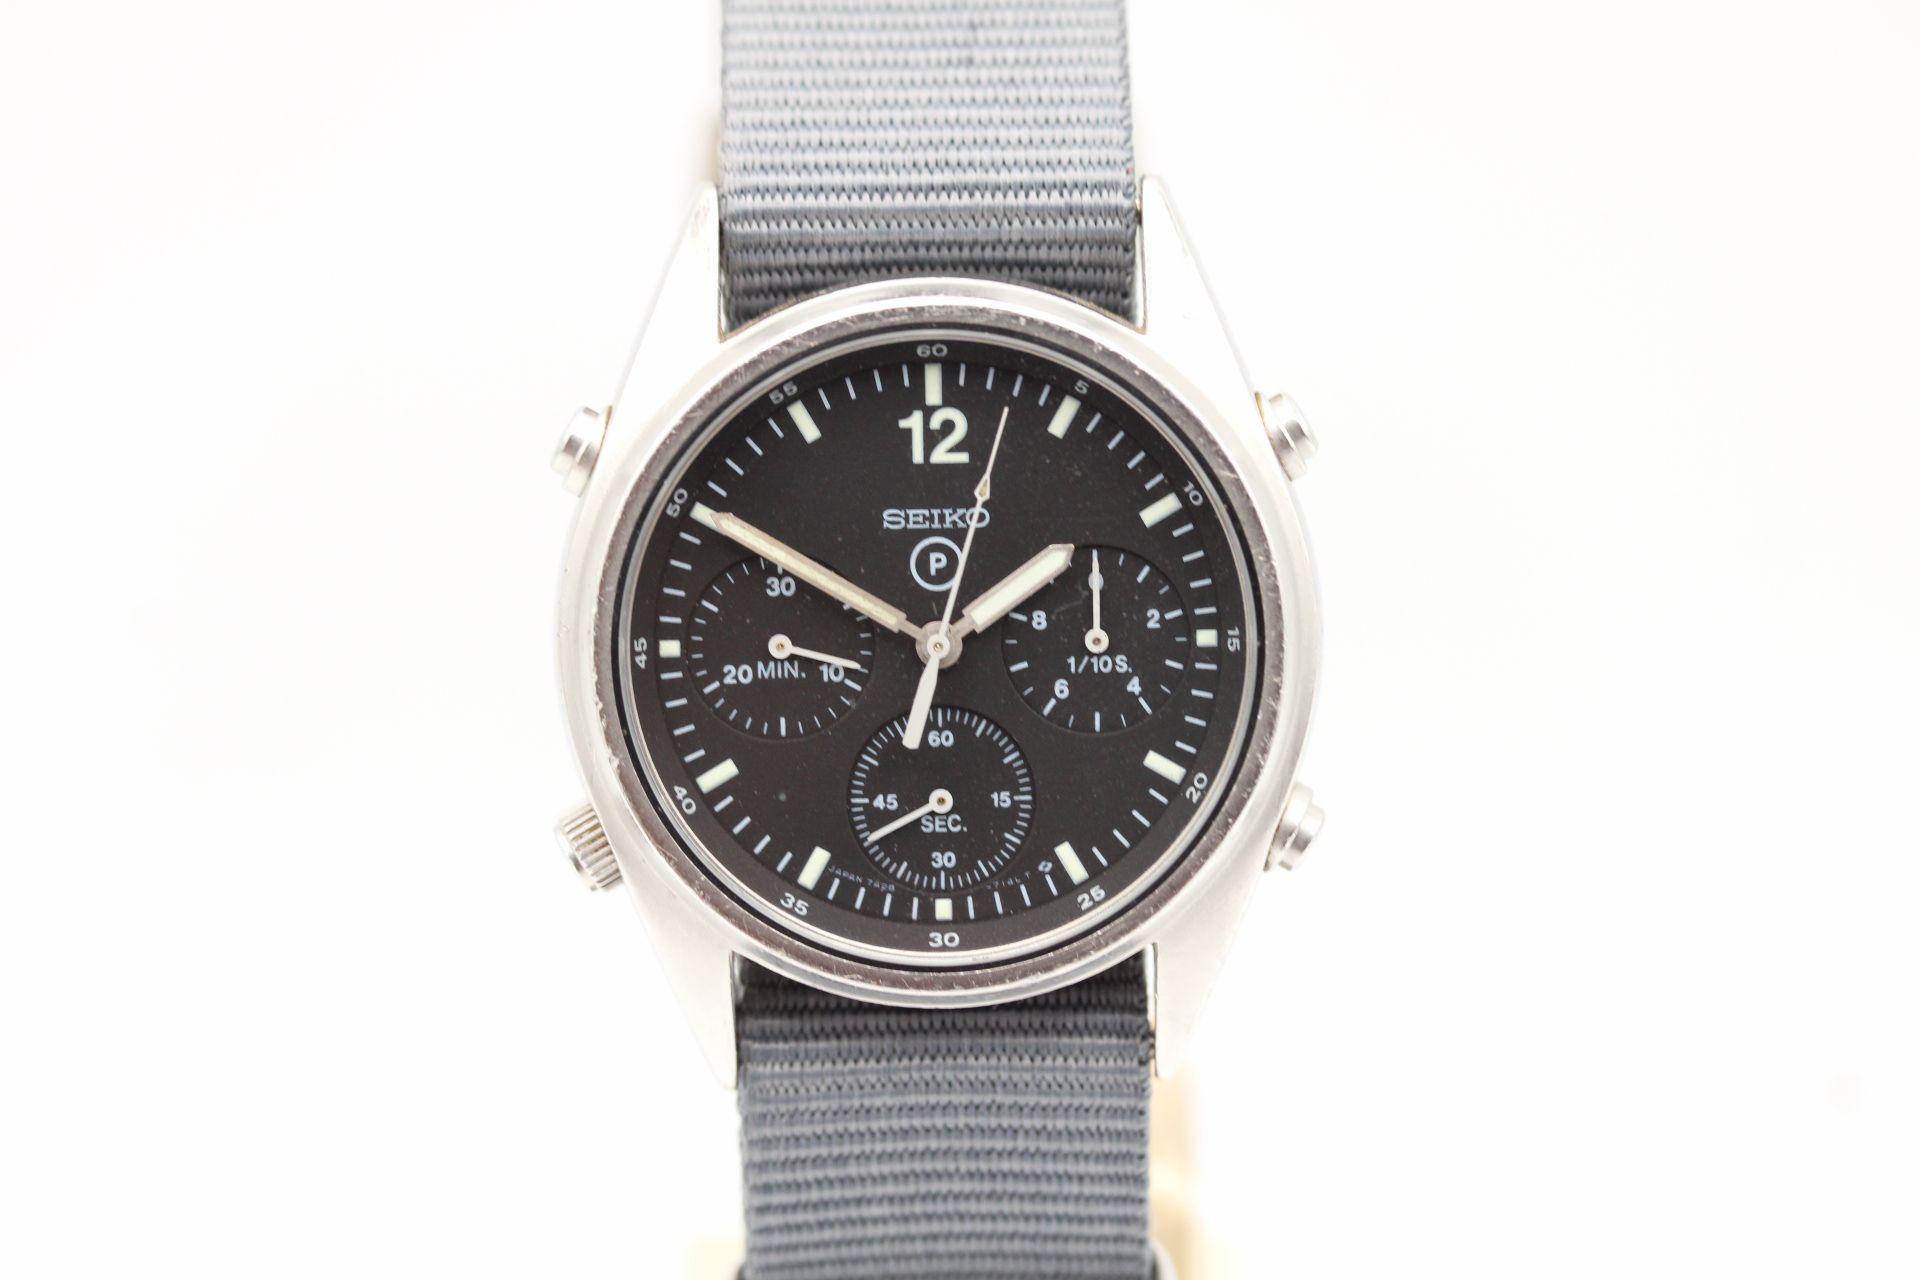 Watch: Seiko Generation 2 - 7T27-7A20 British Military Issued Watch
Stock Number: CHW5375
Price: £695.00

This Seiko 2nd Generation British Military Issued Chronograph arrives with us in its original condition with all markings to case back. Glass